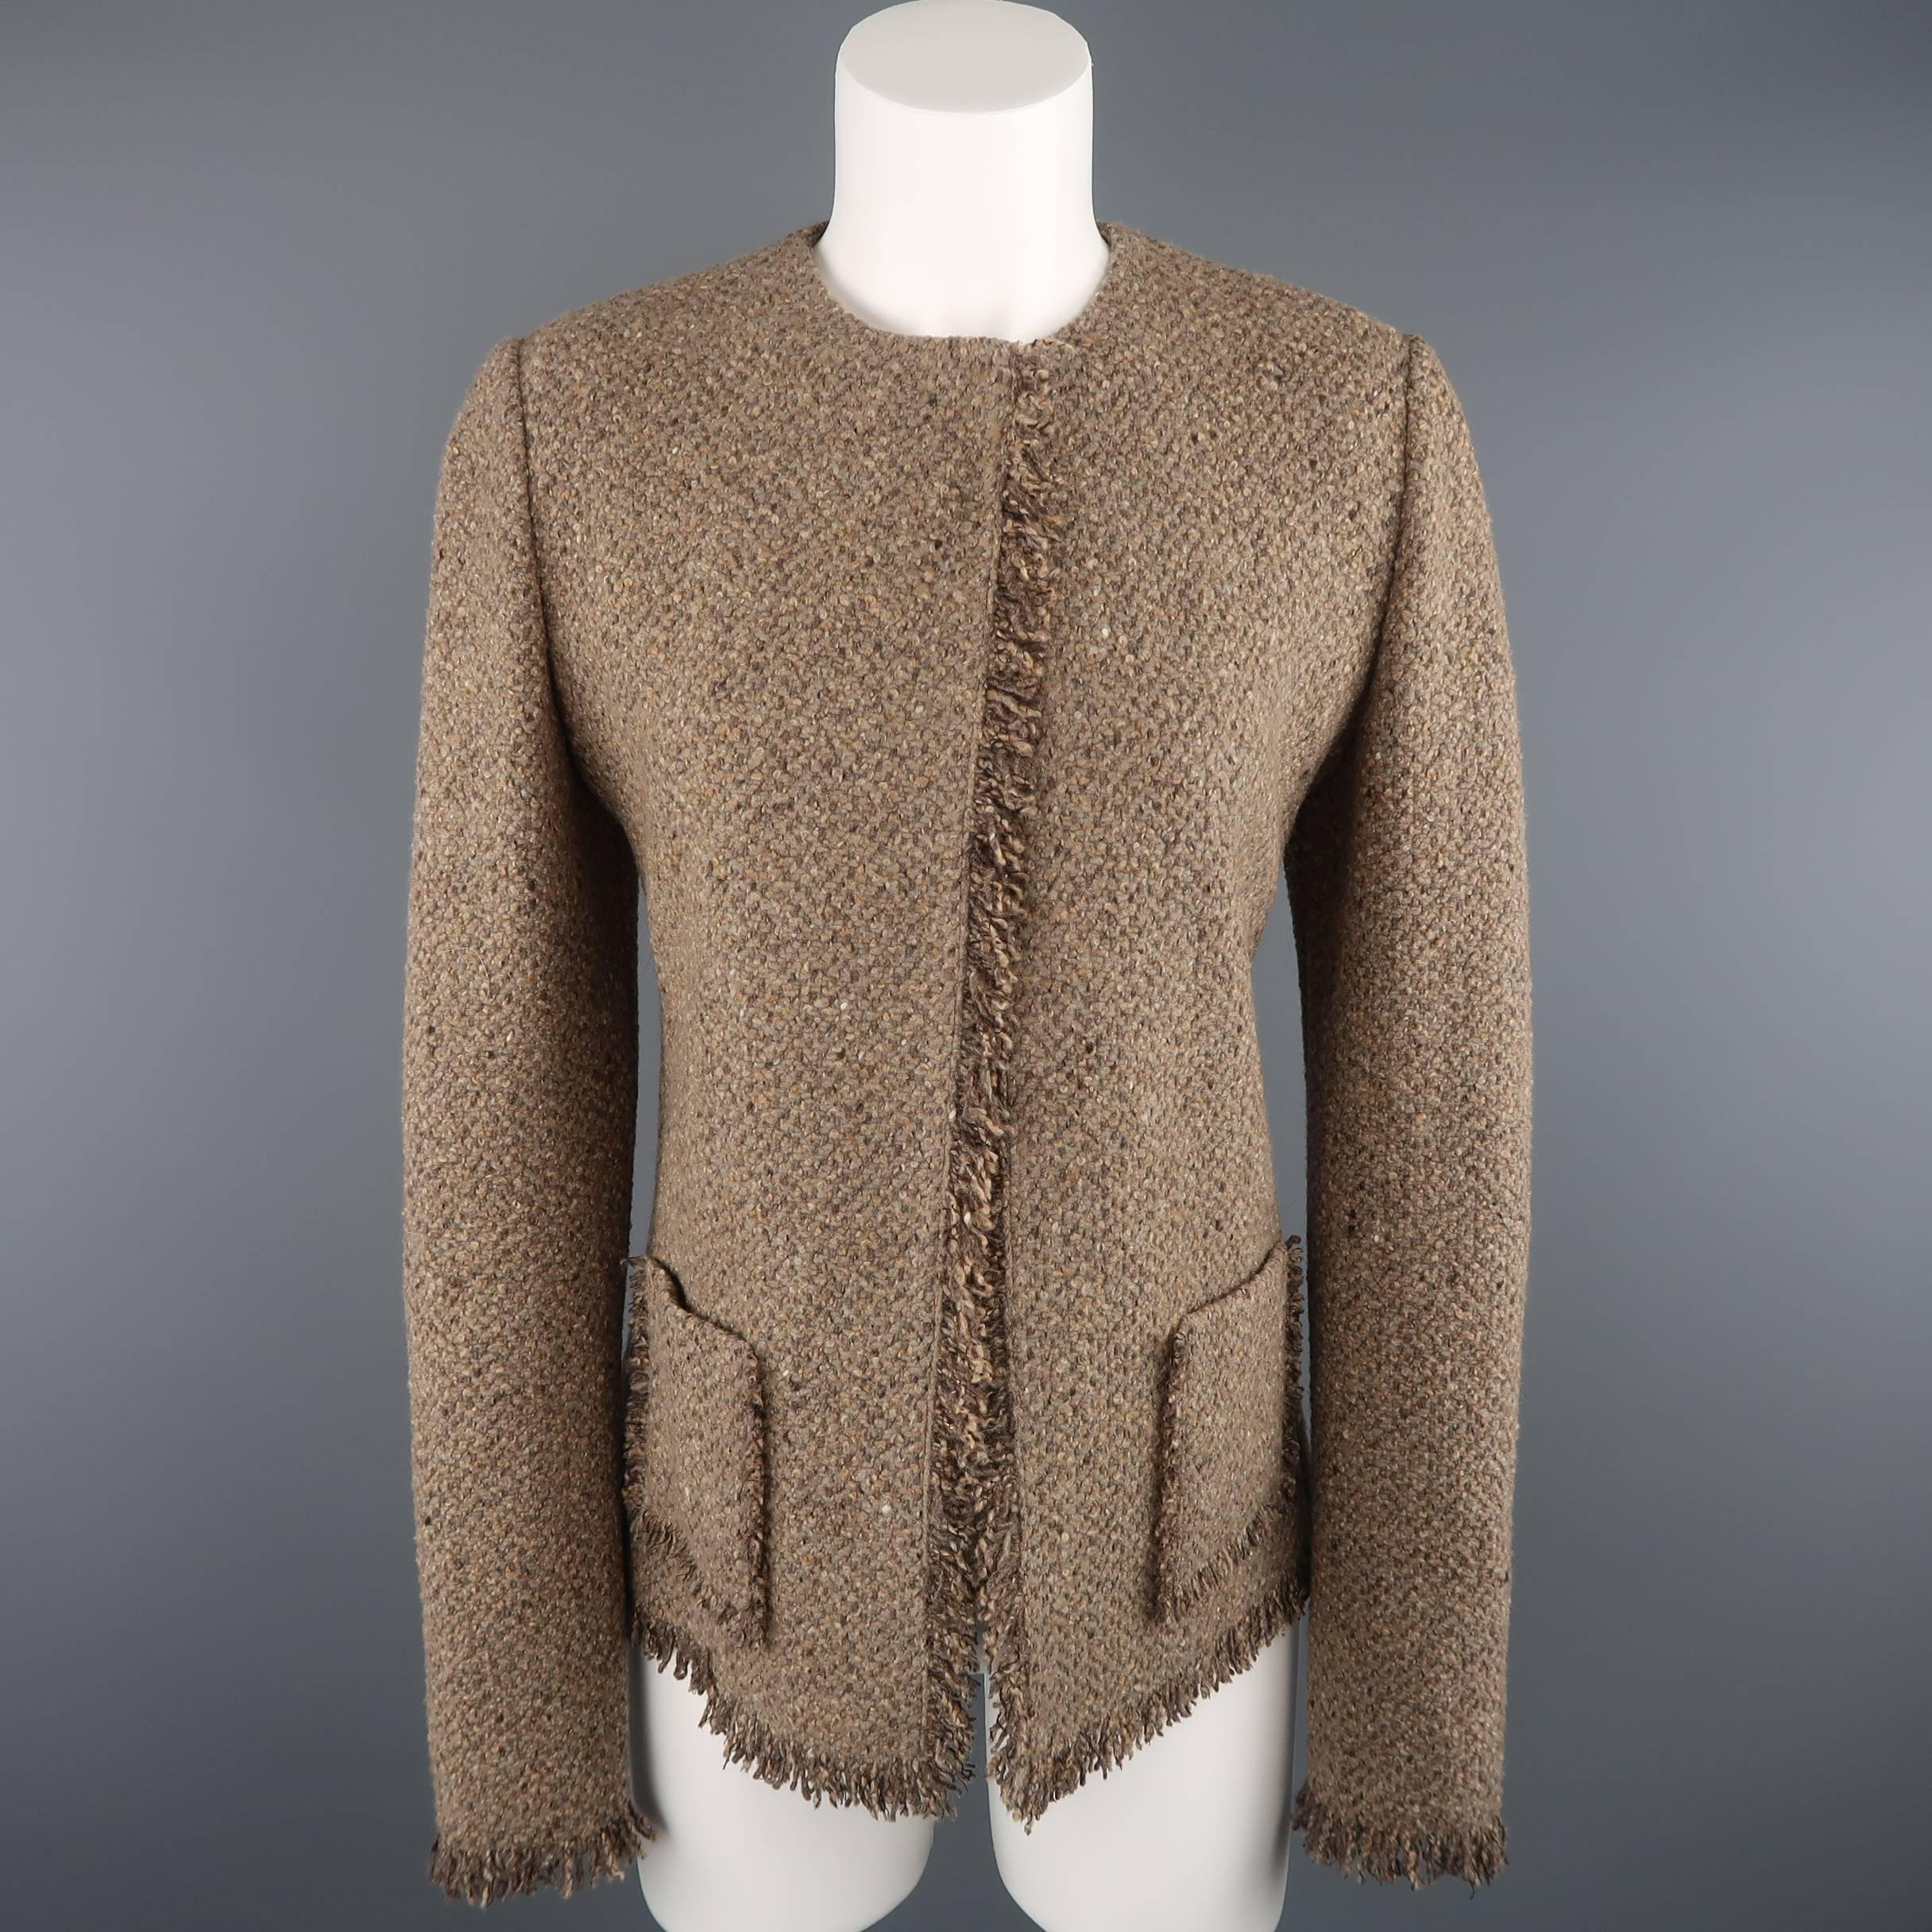 This Ralph Lauren Collection set comes in a taupe beige wool and cashmere blend fringe trimmed Donegal tweed and includes a jacket with round 